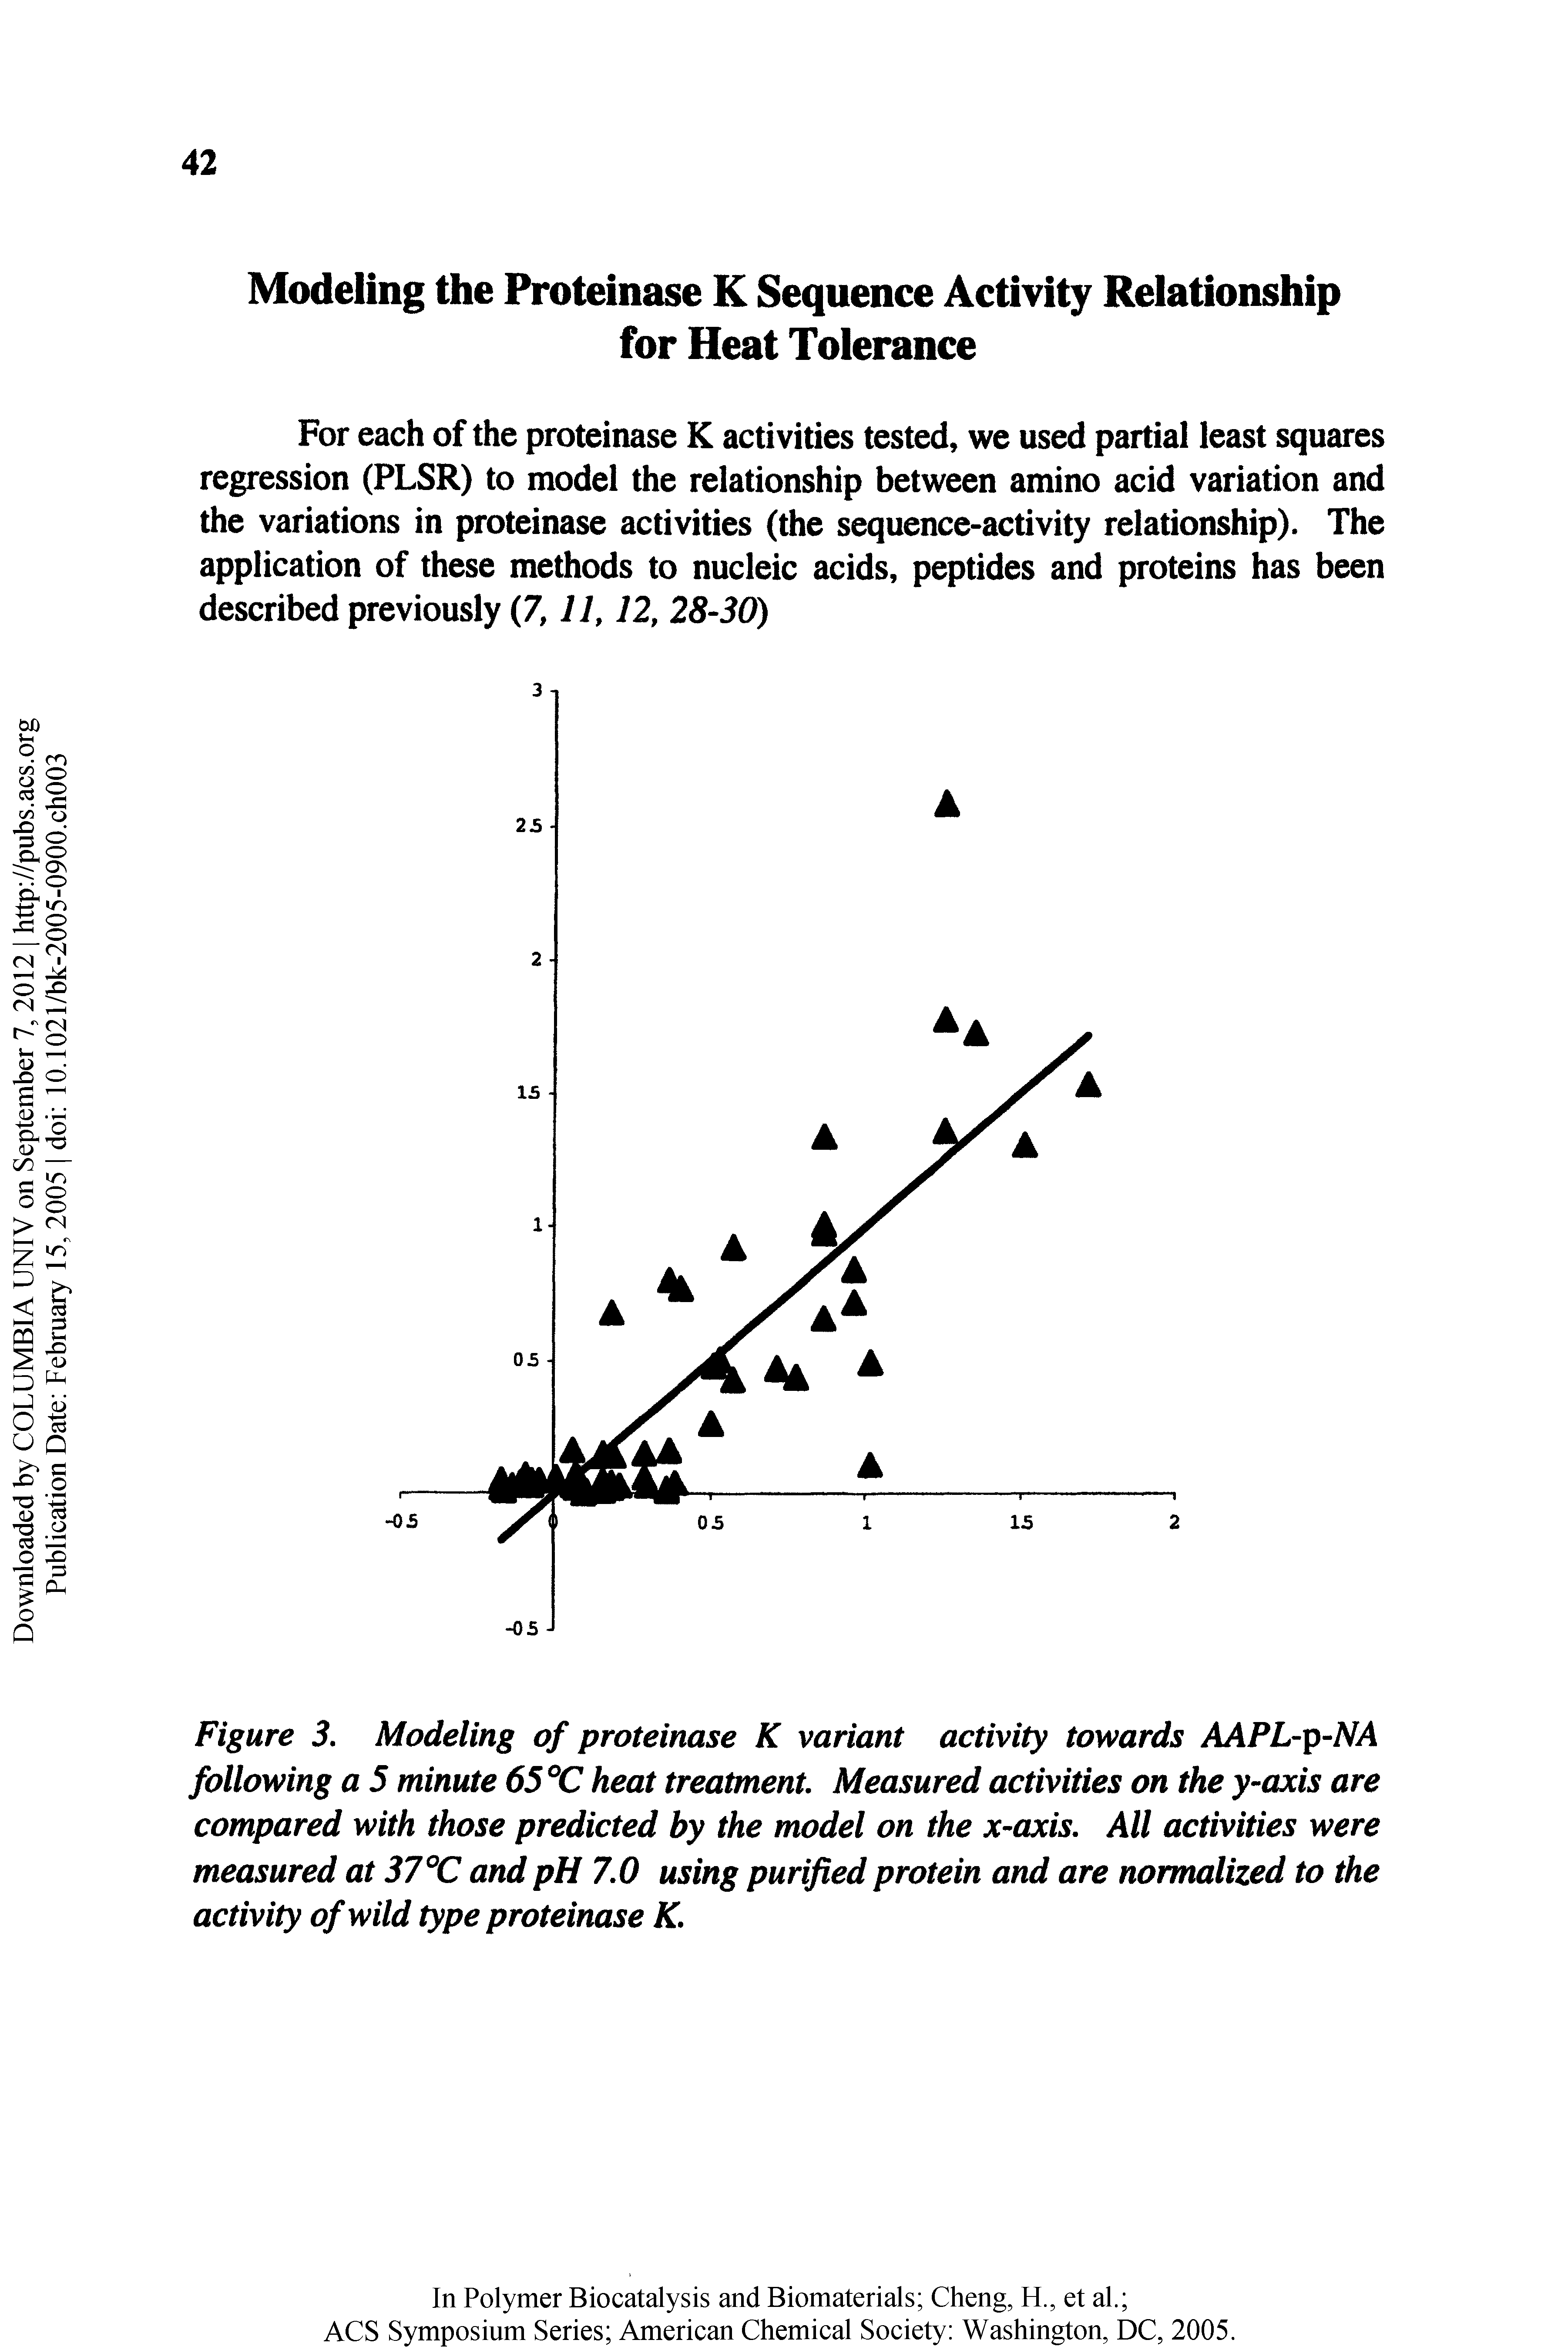 Figure 3. Modeling of proteinase K variant activity towards AAPL ip-NA following a 5 minute 65 heat treatment. Measured activities on the y-axis are compared with those predicted by the model on the x-axis. All activities were measured at 37°C and pH 7.0 using purified protein and are normalized to the activity of wild type proteinase K.